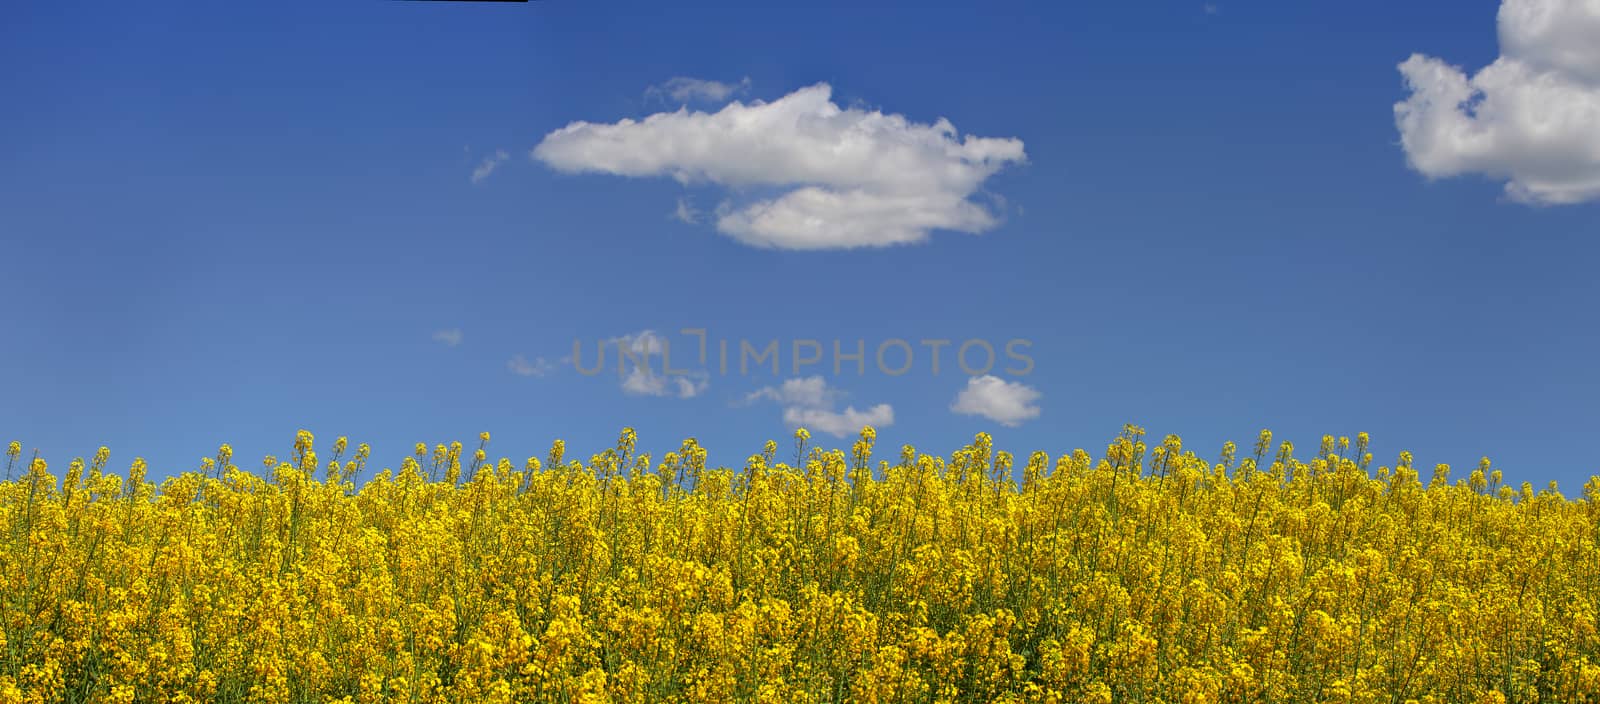 Flowering canola and blue sky, suitable as a border or for your copy